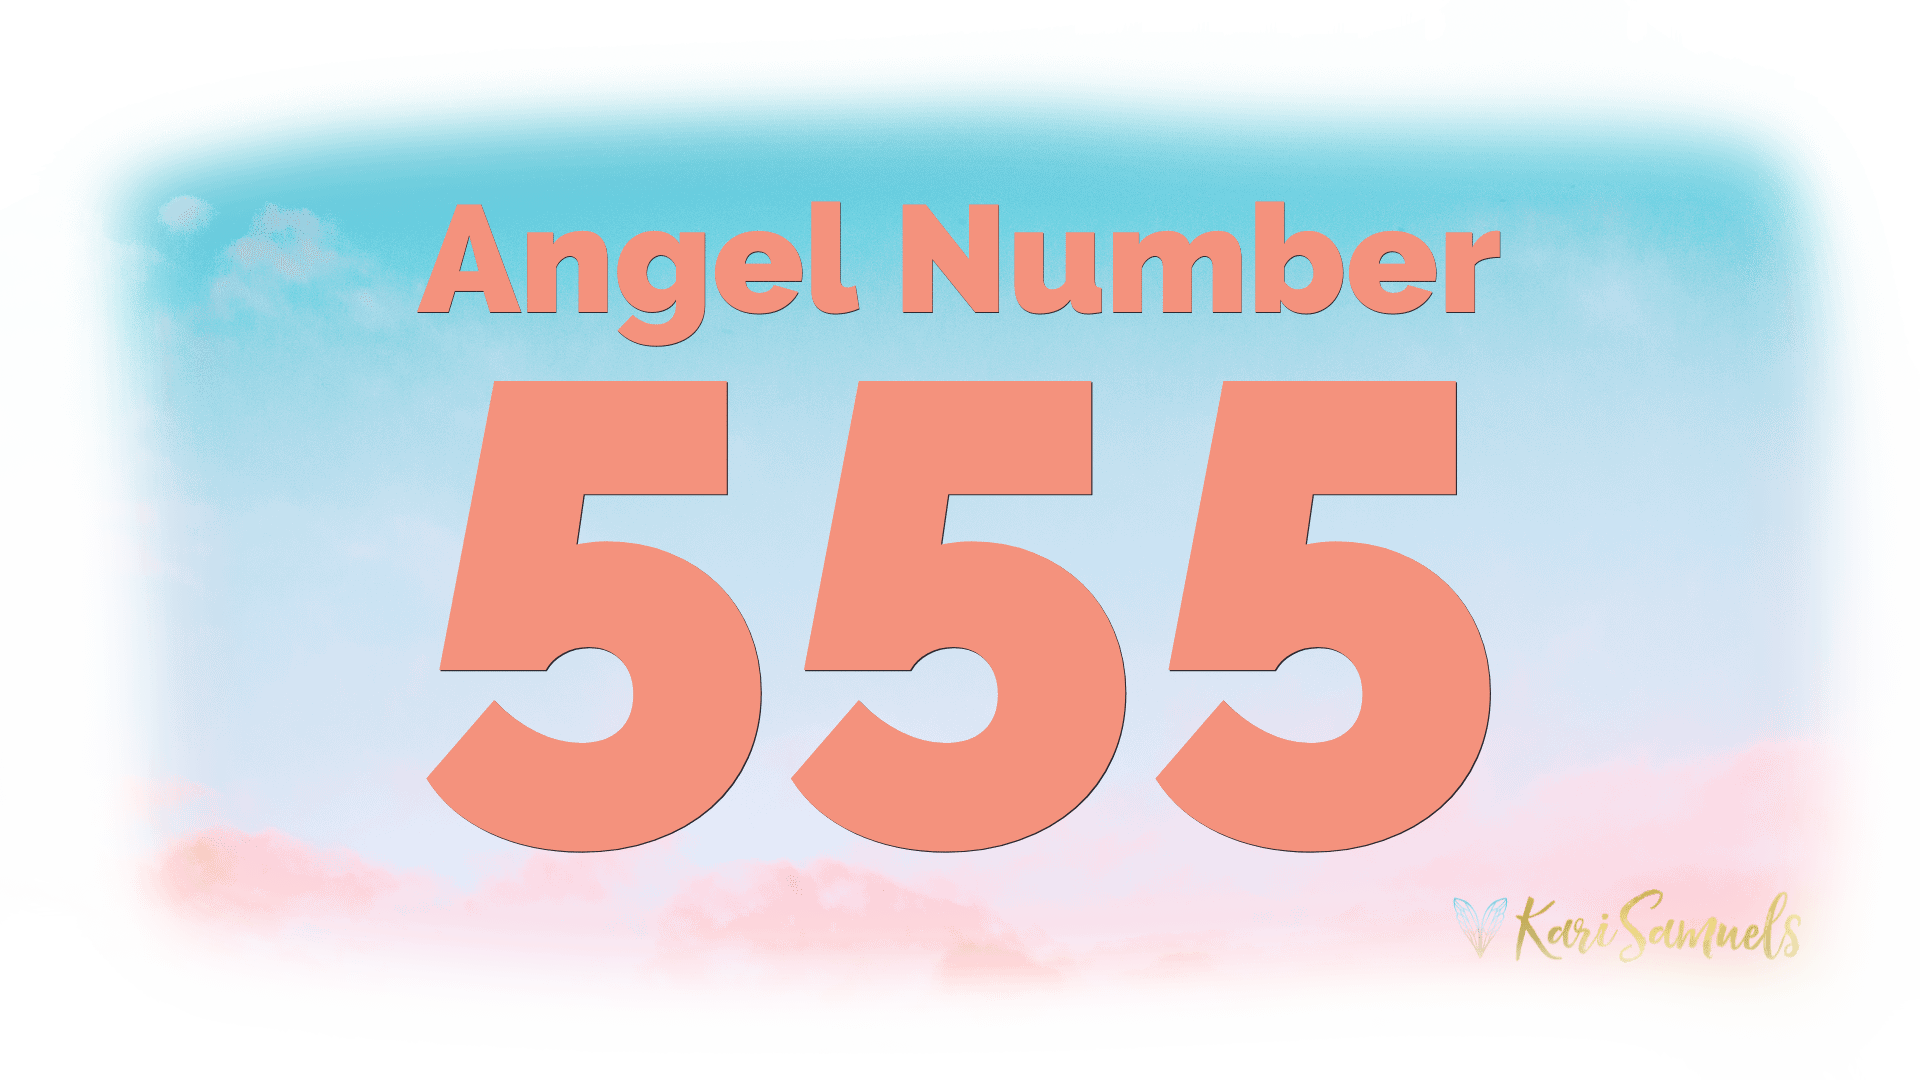 Angel number 555 with skyblue background.